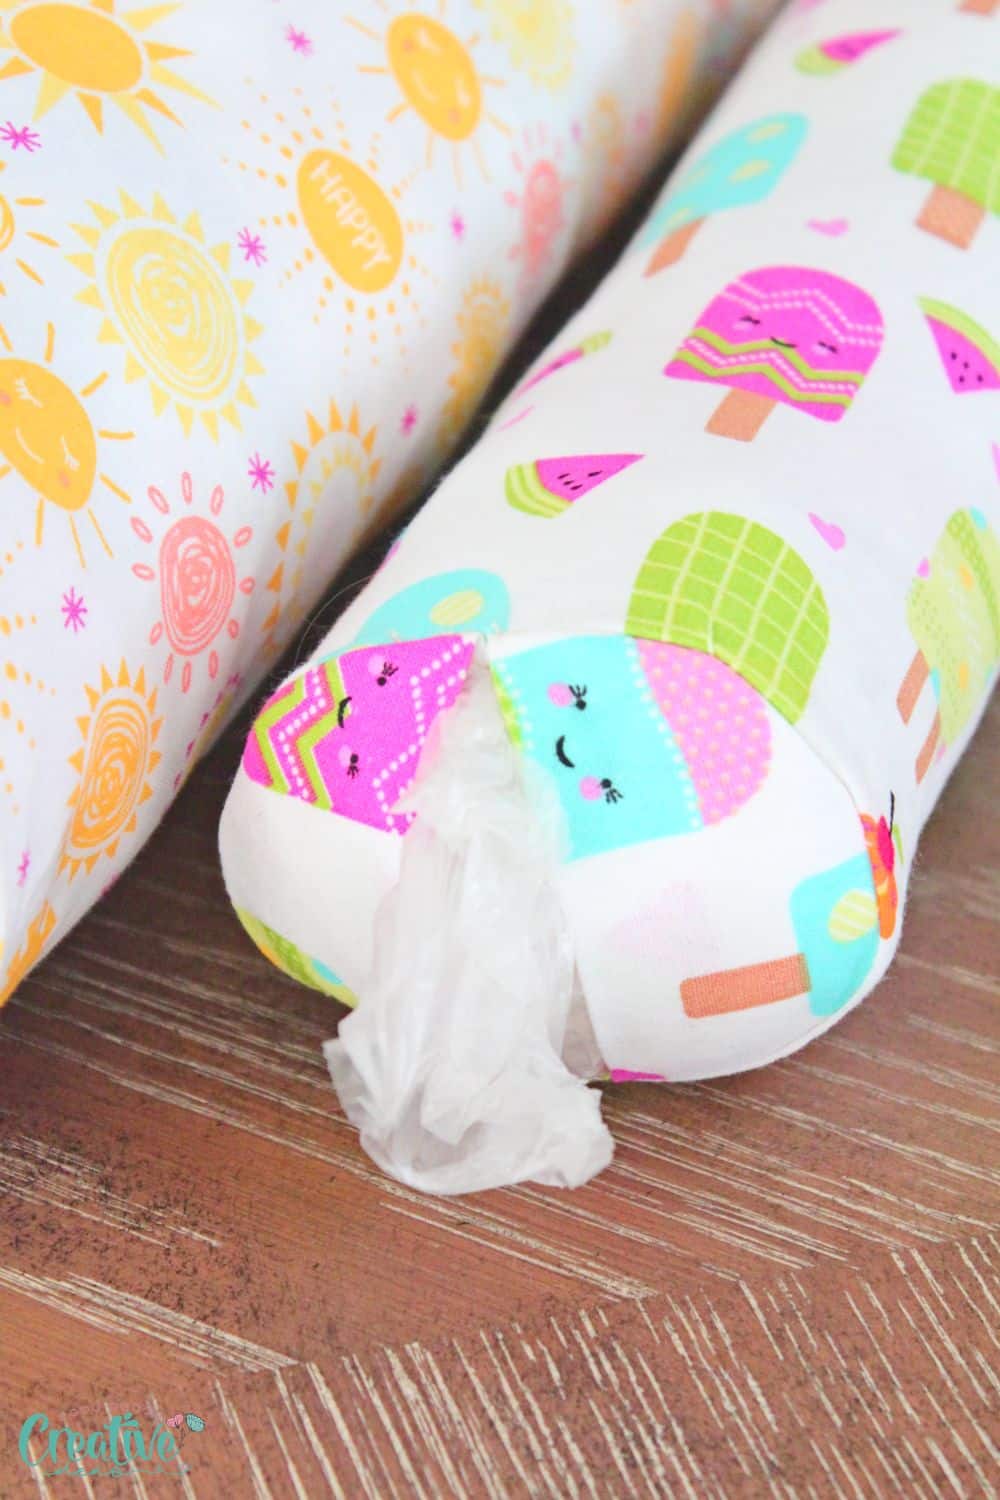 How to sew a plastic bag holder